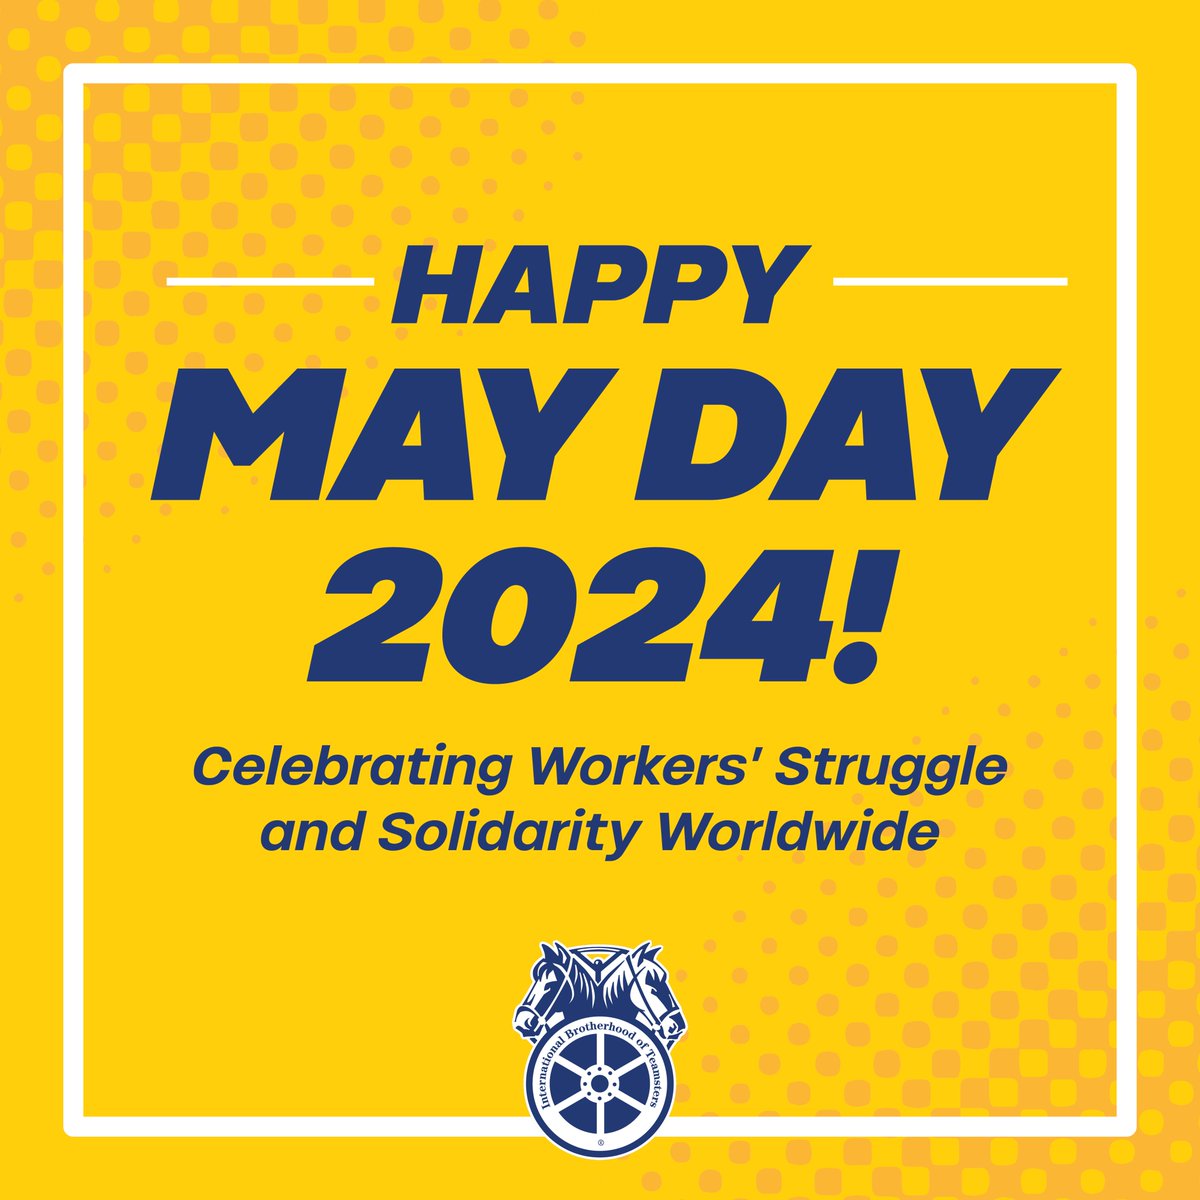 Today is International Workers' Day, or #MayDay. Together with other unions and working people across the globe, the #Teamsters Union celebrates the power and #solidarity of workers worldwide. May Day began as an American holiday commemorating the struggle of workers who fought